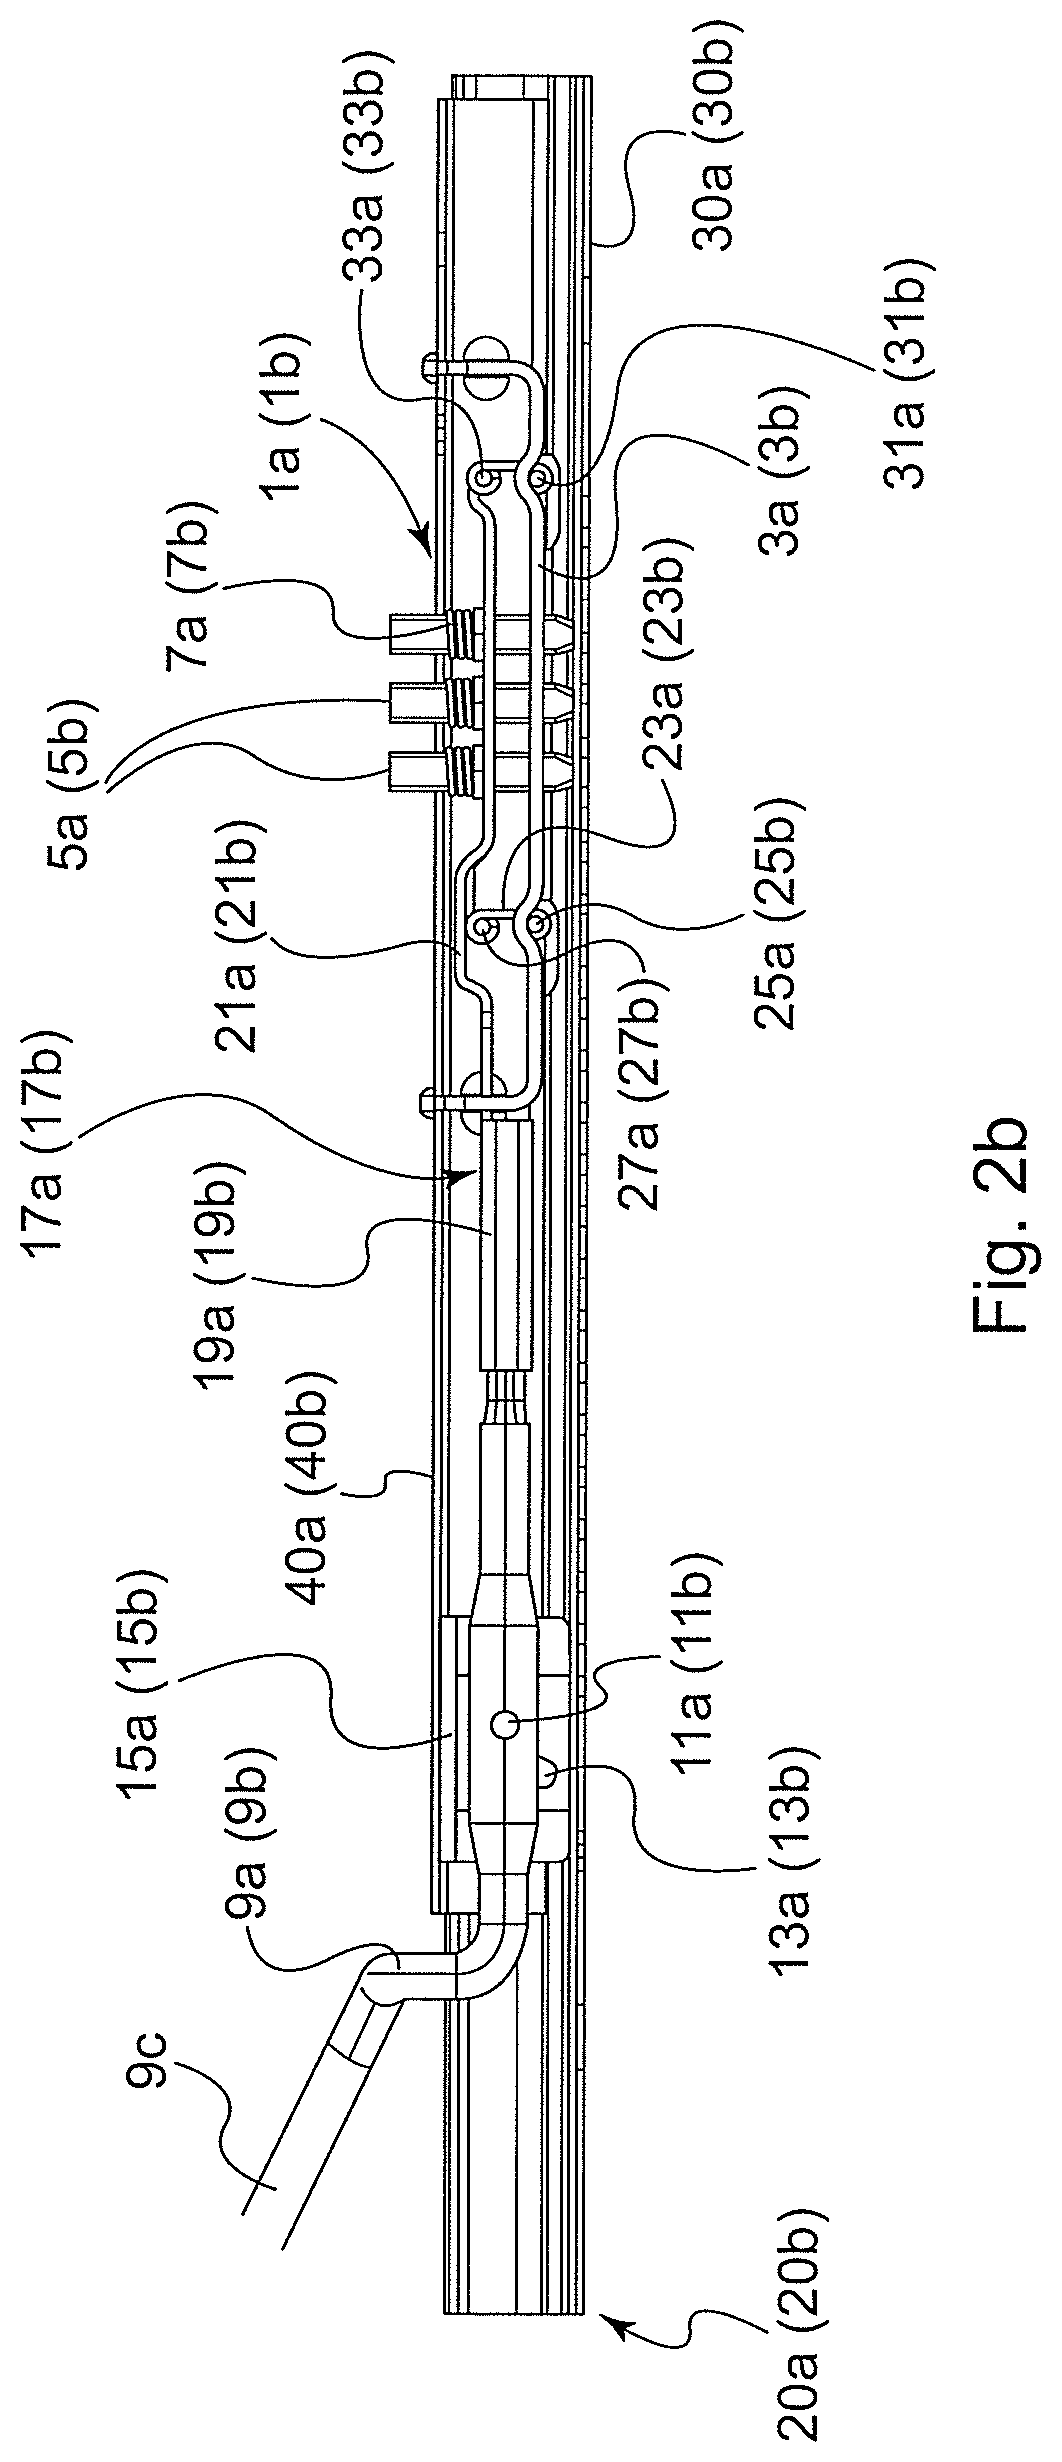 Sliding device for a vehicle seat provided with an improved locking arrangement